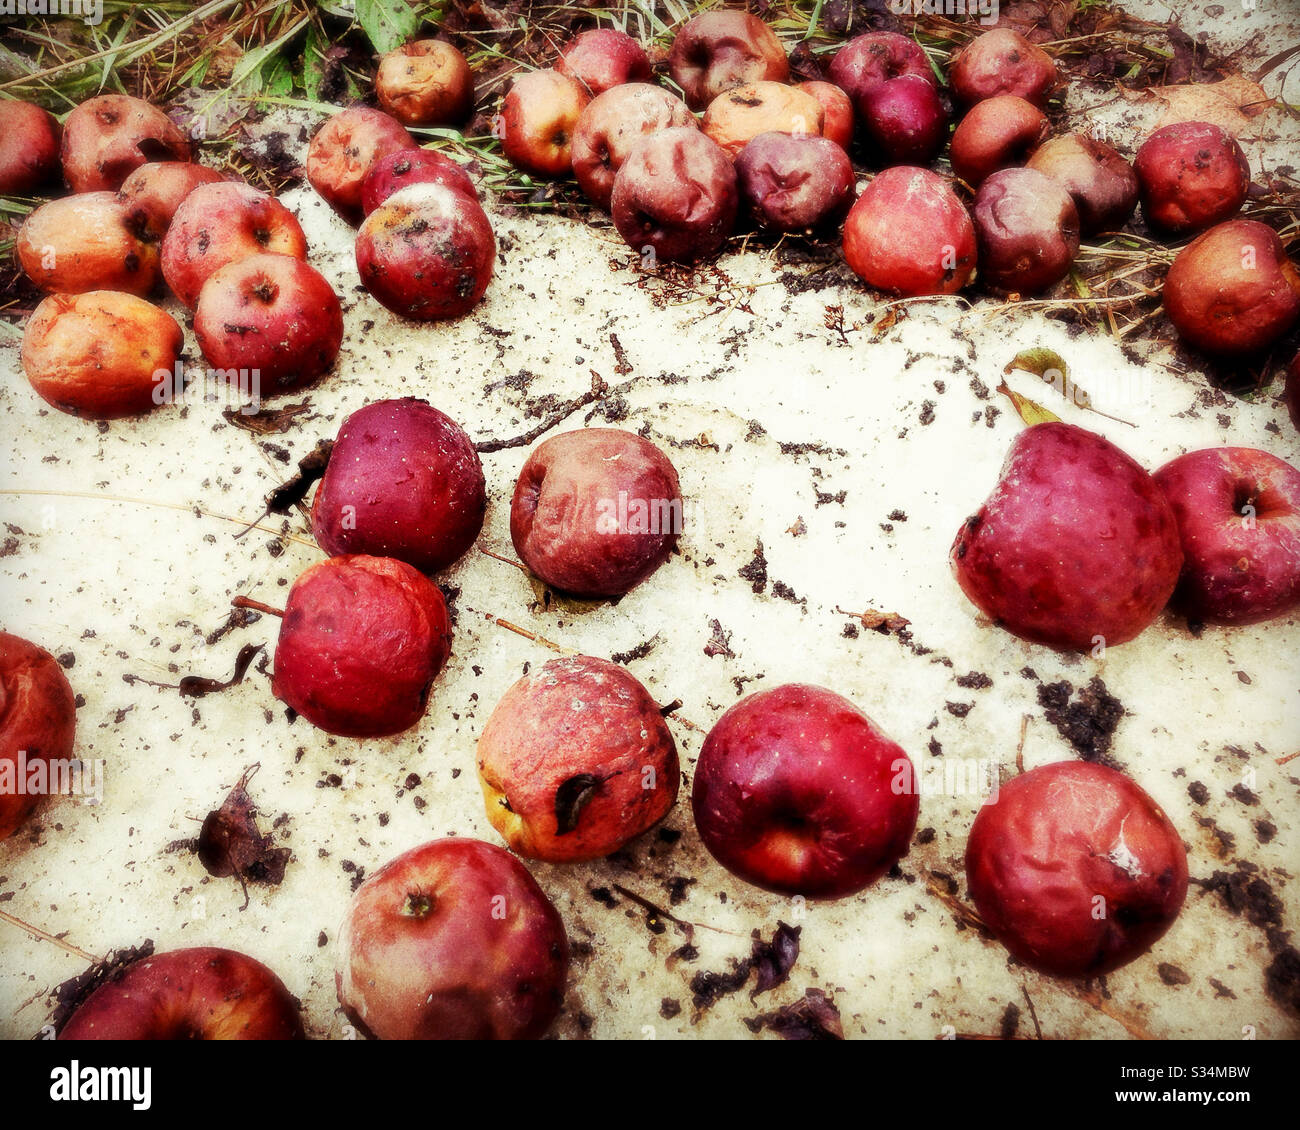 Rotting Apples on Snow Covered Ground Stock Photo